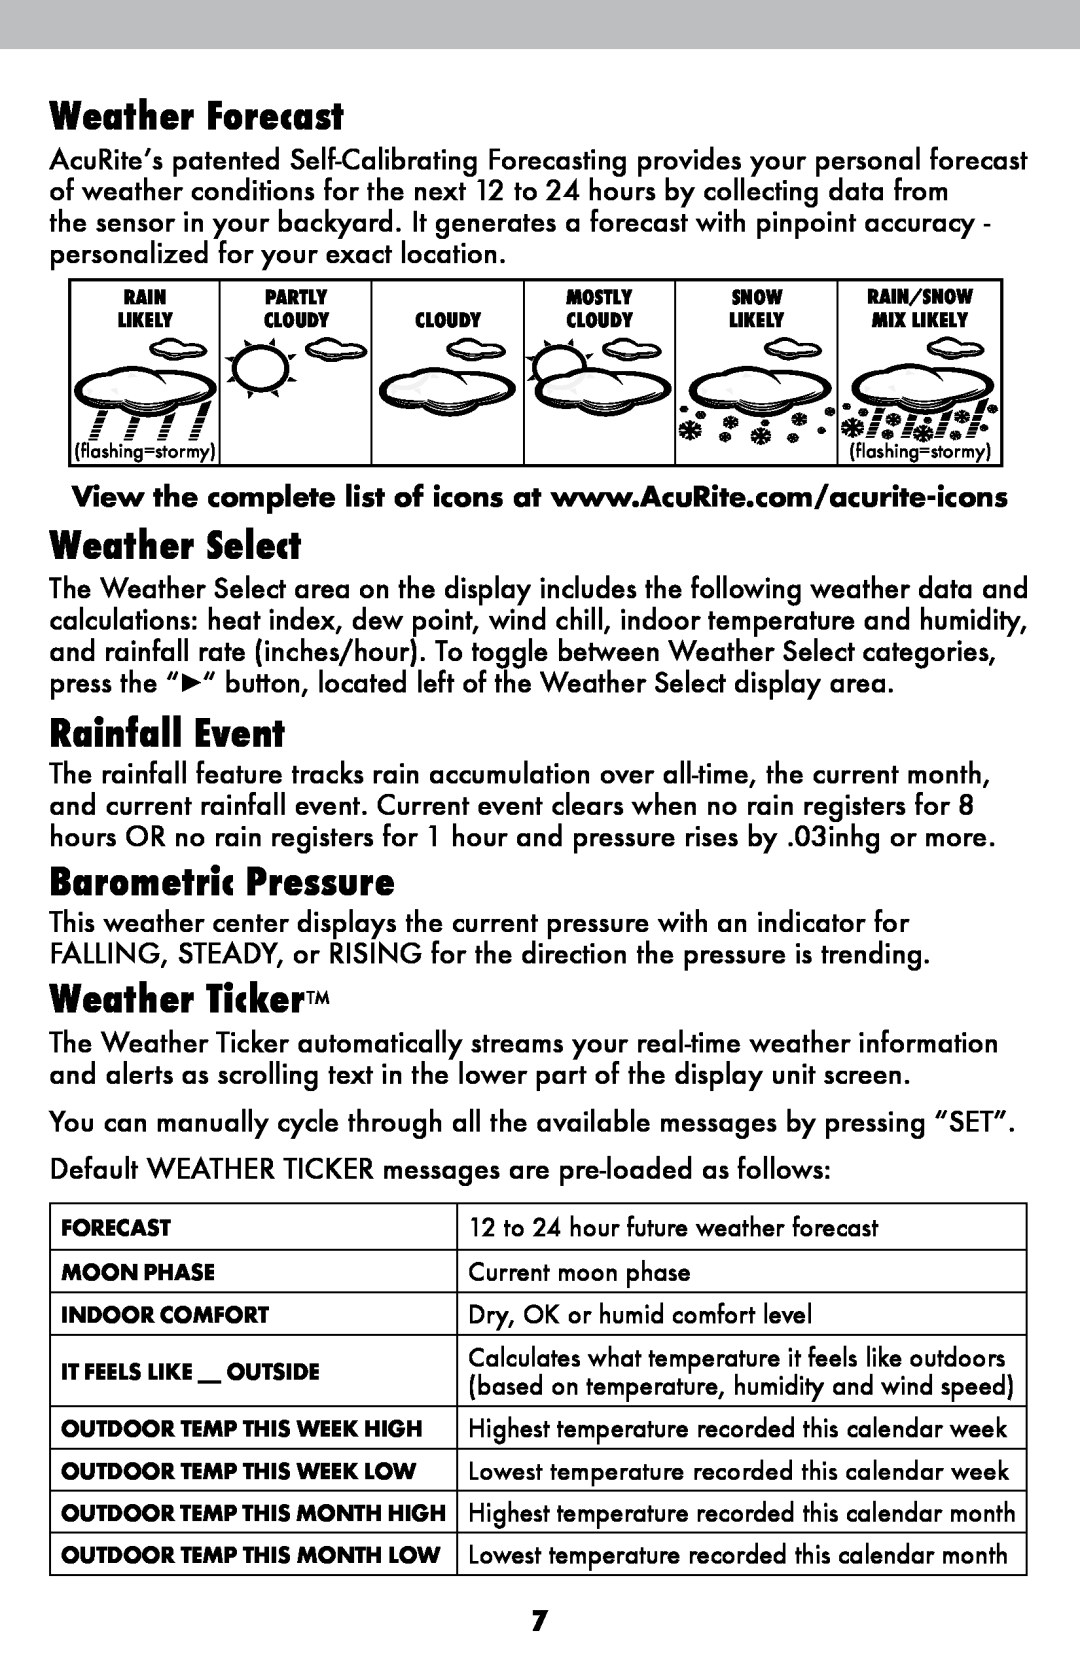 Acu-Rite 06007RM/1015RX Weather Forecast, Weather Select, Rainfall Event, Barometric Pressure, Weather Ticker 